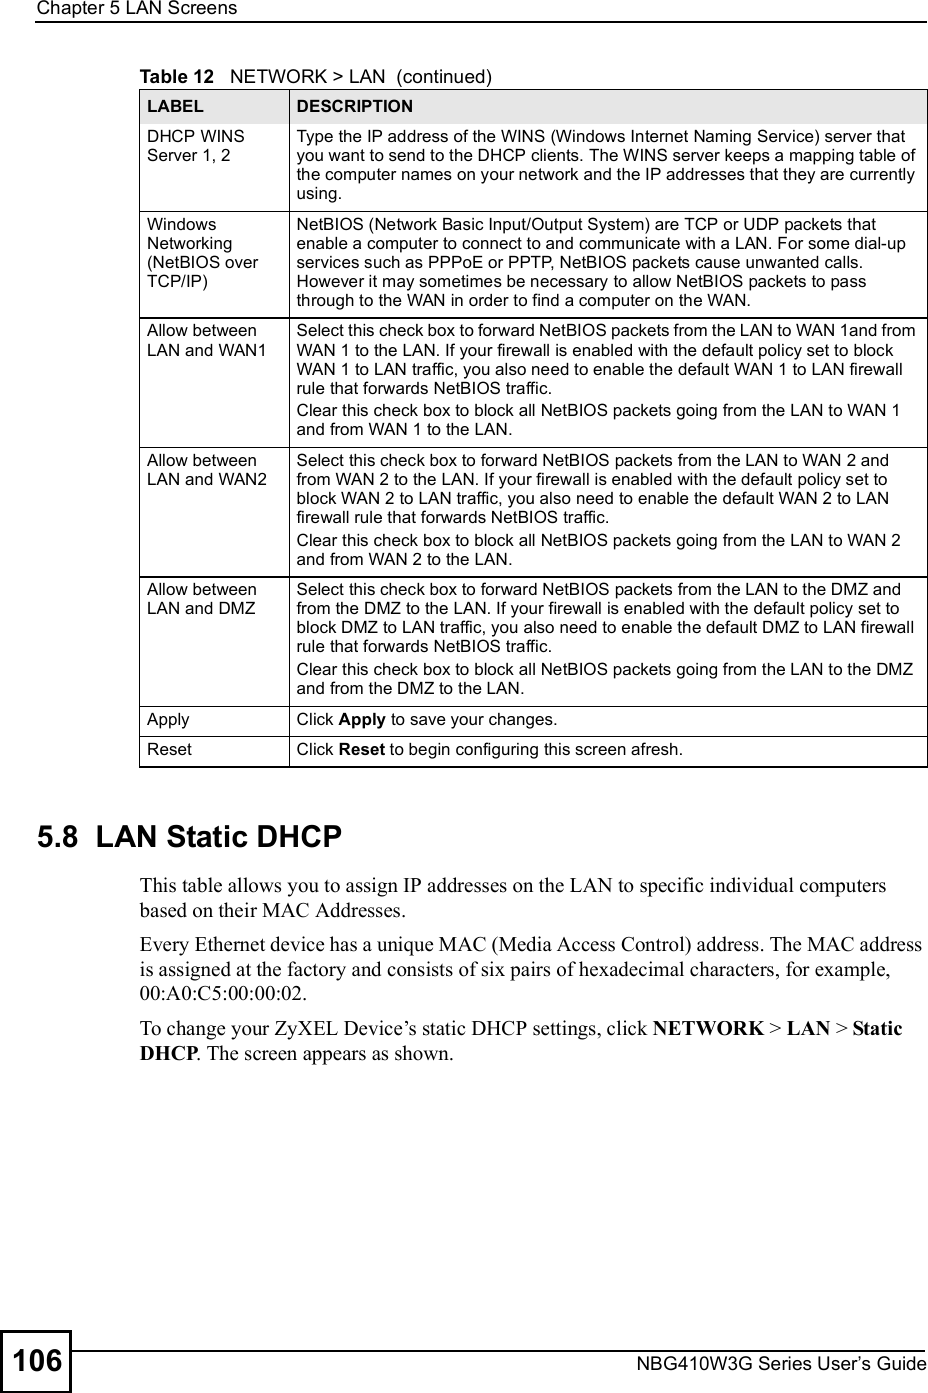 Chapter 5LAN ScreensNBG410W3G Series User s Guide1065.8  LAN Static DHCPThis table allows you to assign IP addresses on the LAN to specific individual computers based on their MAC Addresses. Every Ethernet device has a unique MAC (Media Access Control) address. The MAC address is assigned at the factory and consists of six pairs of hexadecimal characters, for example, 00:A0:C5:00:00:02.To change your ZyXEL Device!s static DHCP settings, click NETWORK &gt; LAN &gt; Static DHCP. The screen appears as shown.DHCP WINS Server 1, 2Type the IP address of the WINS (Windows Internet Naming Service) server that you want to send to the DHCP clients. The WINS server keeps a mapping table of the computer names on your network and the IP addresses that they are currently using.  Windows Networking (NetBIOS over TCP/IP)NetBIOS (Network Basic Input/Output System) are TCP or UDP packets that enable a computer to connect to and communicate with a LAN. For some dial-up services such as PPPoE or PPTP, NetBIOS packets cause unwanted calls. However it may sometimes be necessary to allow NetBIOS packets to pass through to the WAN in order to find a computer on the WAN.Allow between LAN and WAN1Select this check box to forward NetBIOS packets from the LAN to WAN 1and from WAN 1 to the LAN. If your firewall is enabled with the default policy set to block WAN 1 to LAN traffic, you also need to enable the default WAN 1 to LAN firewall rule that forwards NetBIOS traffic.Clear this check box to block all NetBIOS packets going from the LAN to WAN 1 and from WAN 1 to the LAN.Allow between LAN and WAN2Select this check box to forward NetBIOS packets from the LAN to WAN 2 and from WAN 2 to the LAN. If your firewall is enabled with the default policy set to block WAN 2 to LAN traffic, you also need to enable the default WAN 2 to LAN firewall rule that forwards NetBIOS traffic.Clear this check box to block all NetBIOS packets going from the LAN to WAN 2 and from WAN 2 to the LAN.Allow between LAN and DMZSelect this check box to forward NetBIOS packets from the LAN to the DMZ and from the DMZ to the LAN. If your firewall is enabled with the default policy set to block DMZ to LAN traffic, you also need to enable the default DMZ to LAN firewall rule that forwards NetBIOS traffic.Clear this check box to block all NetBIOS packets going from the LAN to the DMZ and from the DMZ to the LAN.ApplyClick Apply to save your changes.ResetClick Reset to begin configuring this screen afresh.Table 12   NETWORK &gt; LAN  (continued)LABEL DESCRIPTION